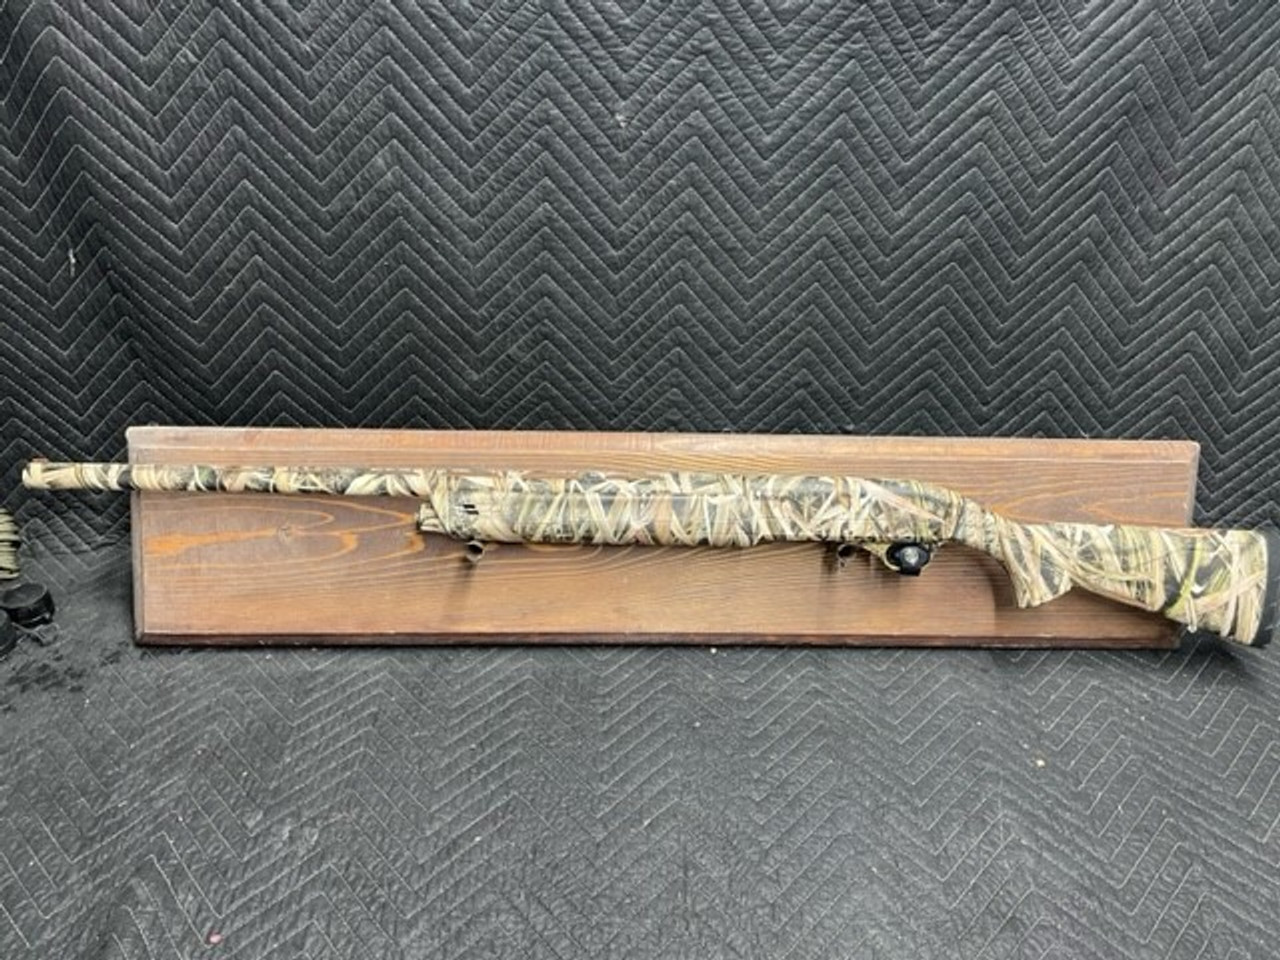 Used Winchester SX3 12 Gauge 3.5" 28" (4rds - 2 3/4") Mossy Oak Shadow Grass Blade